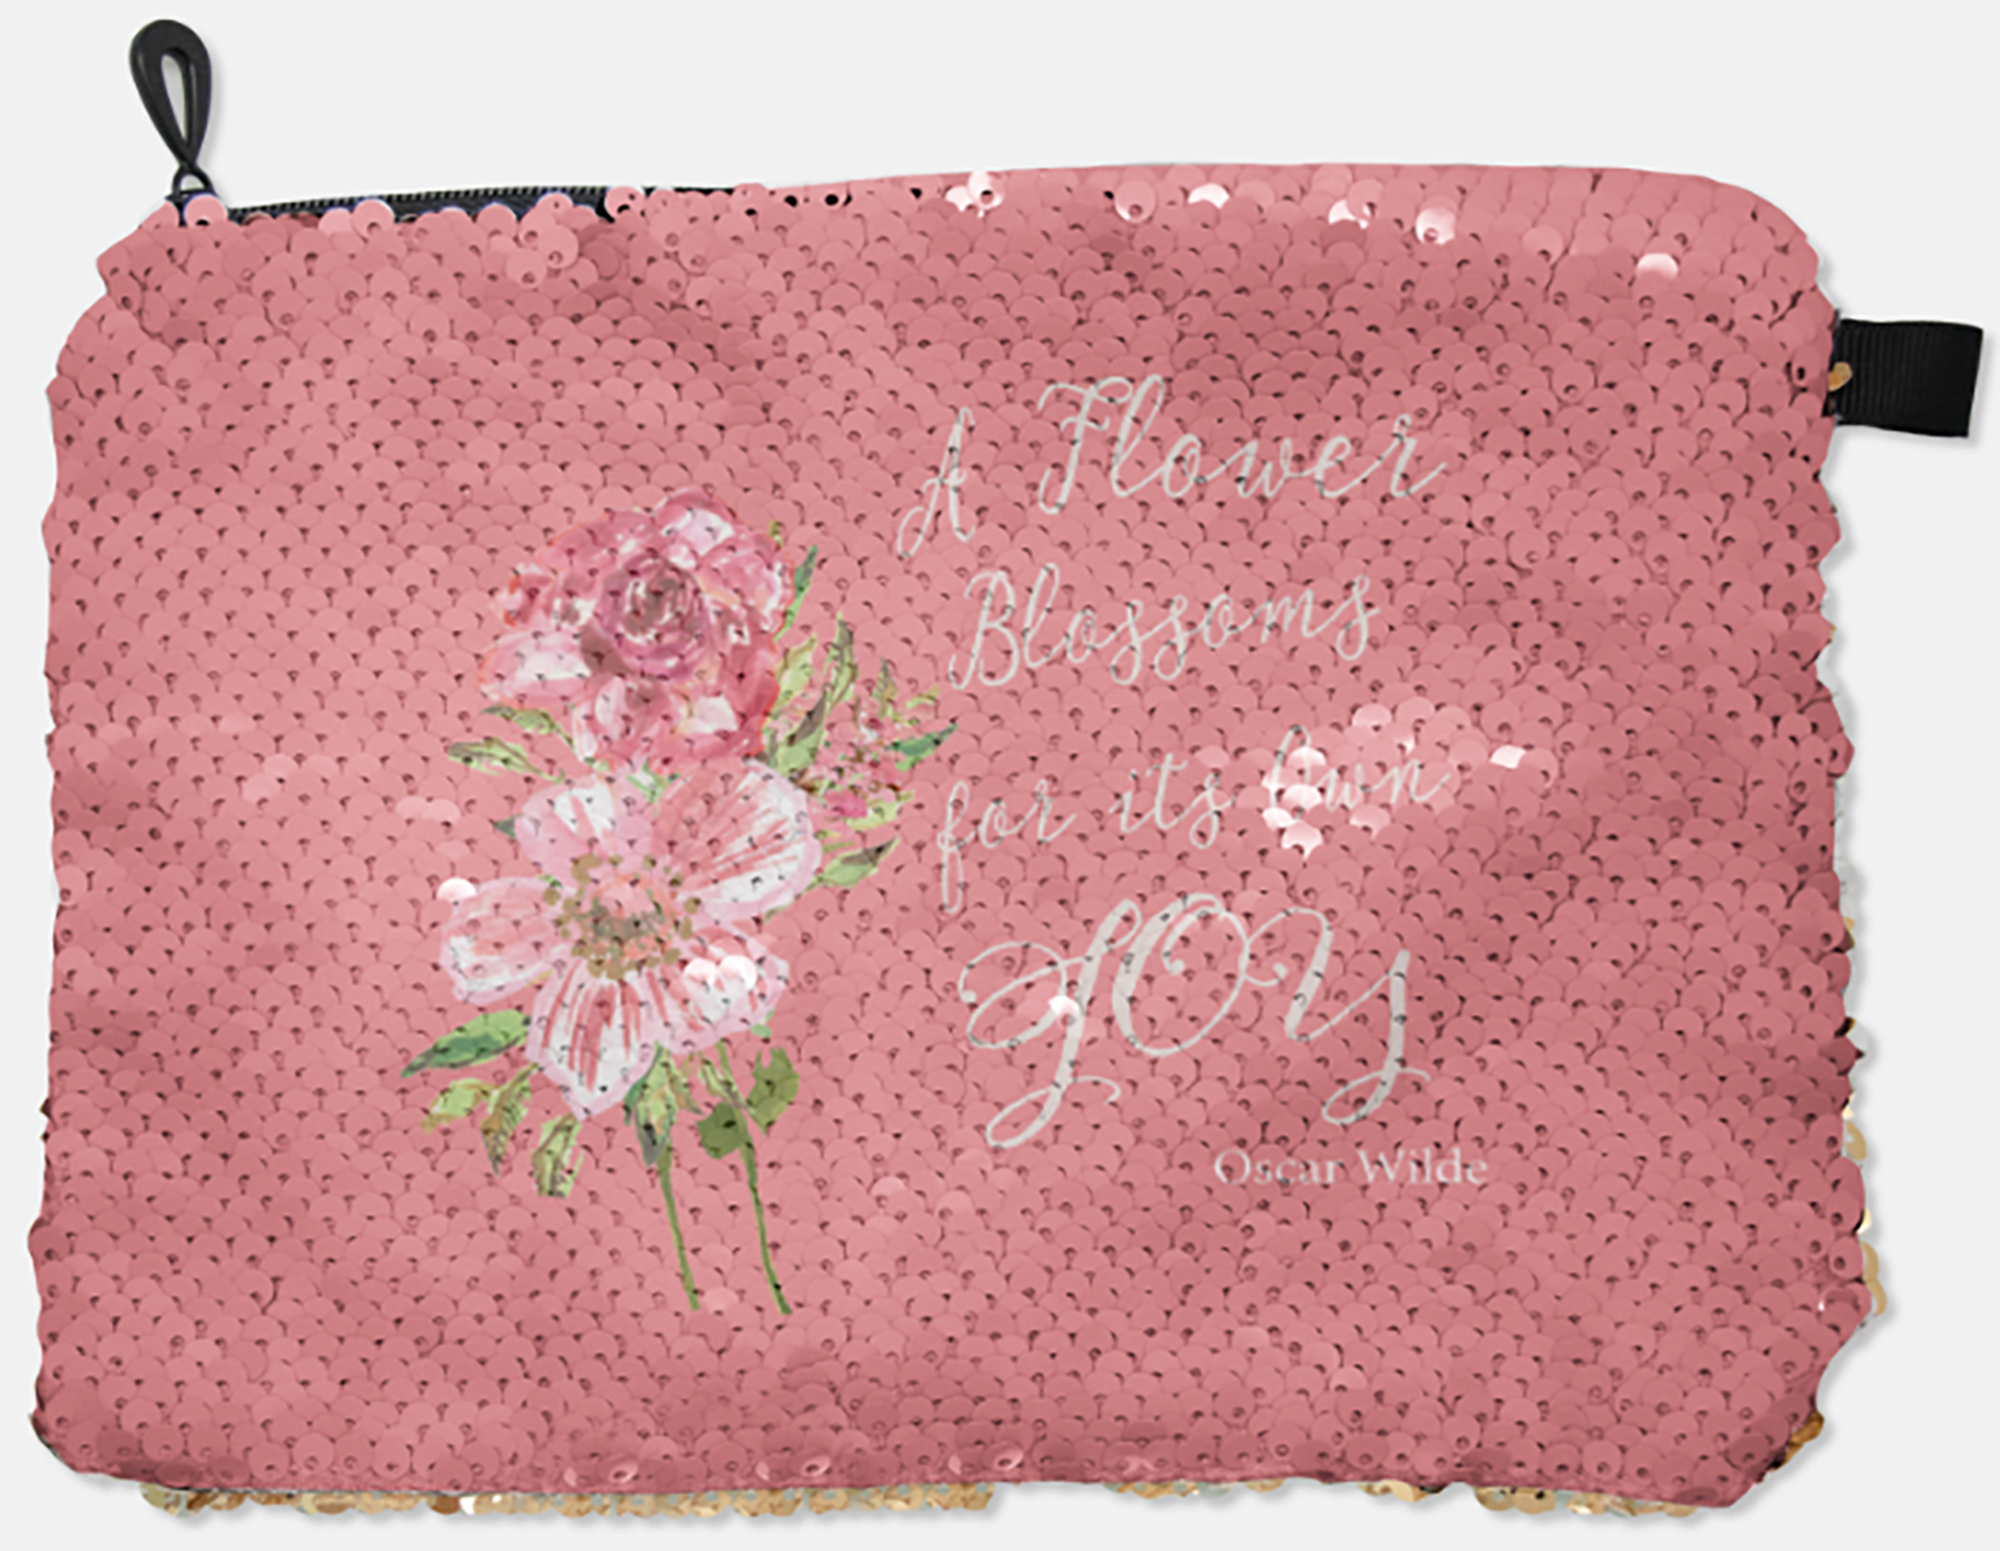 COSMETIC BAG - OSCAR WILDE - A FLOWER BLOSSOMS / ROSE GOLD SEQUINS - Dreams After All